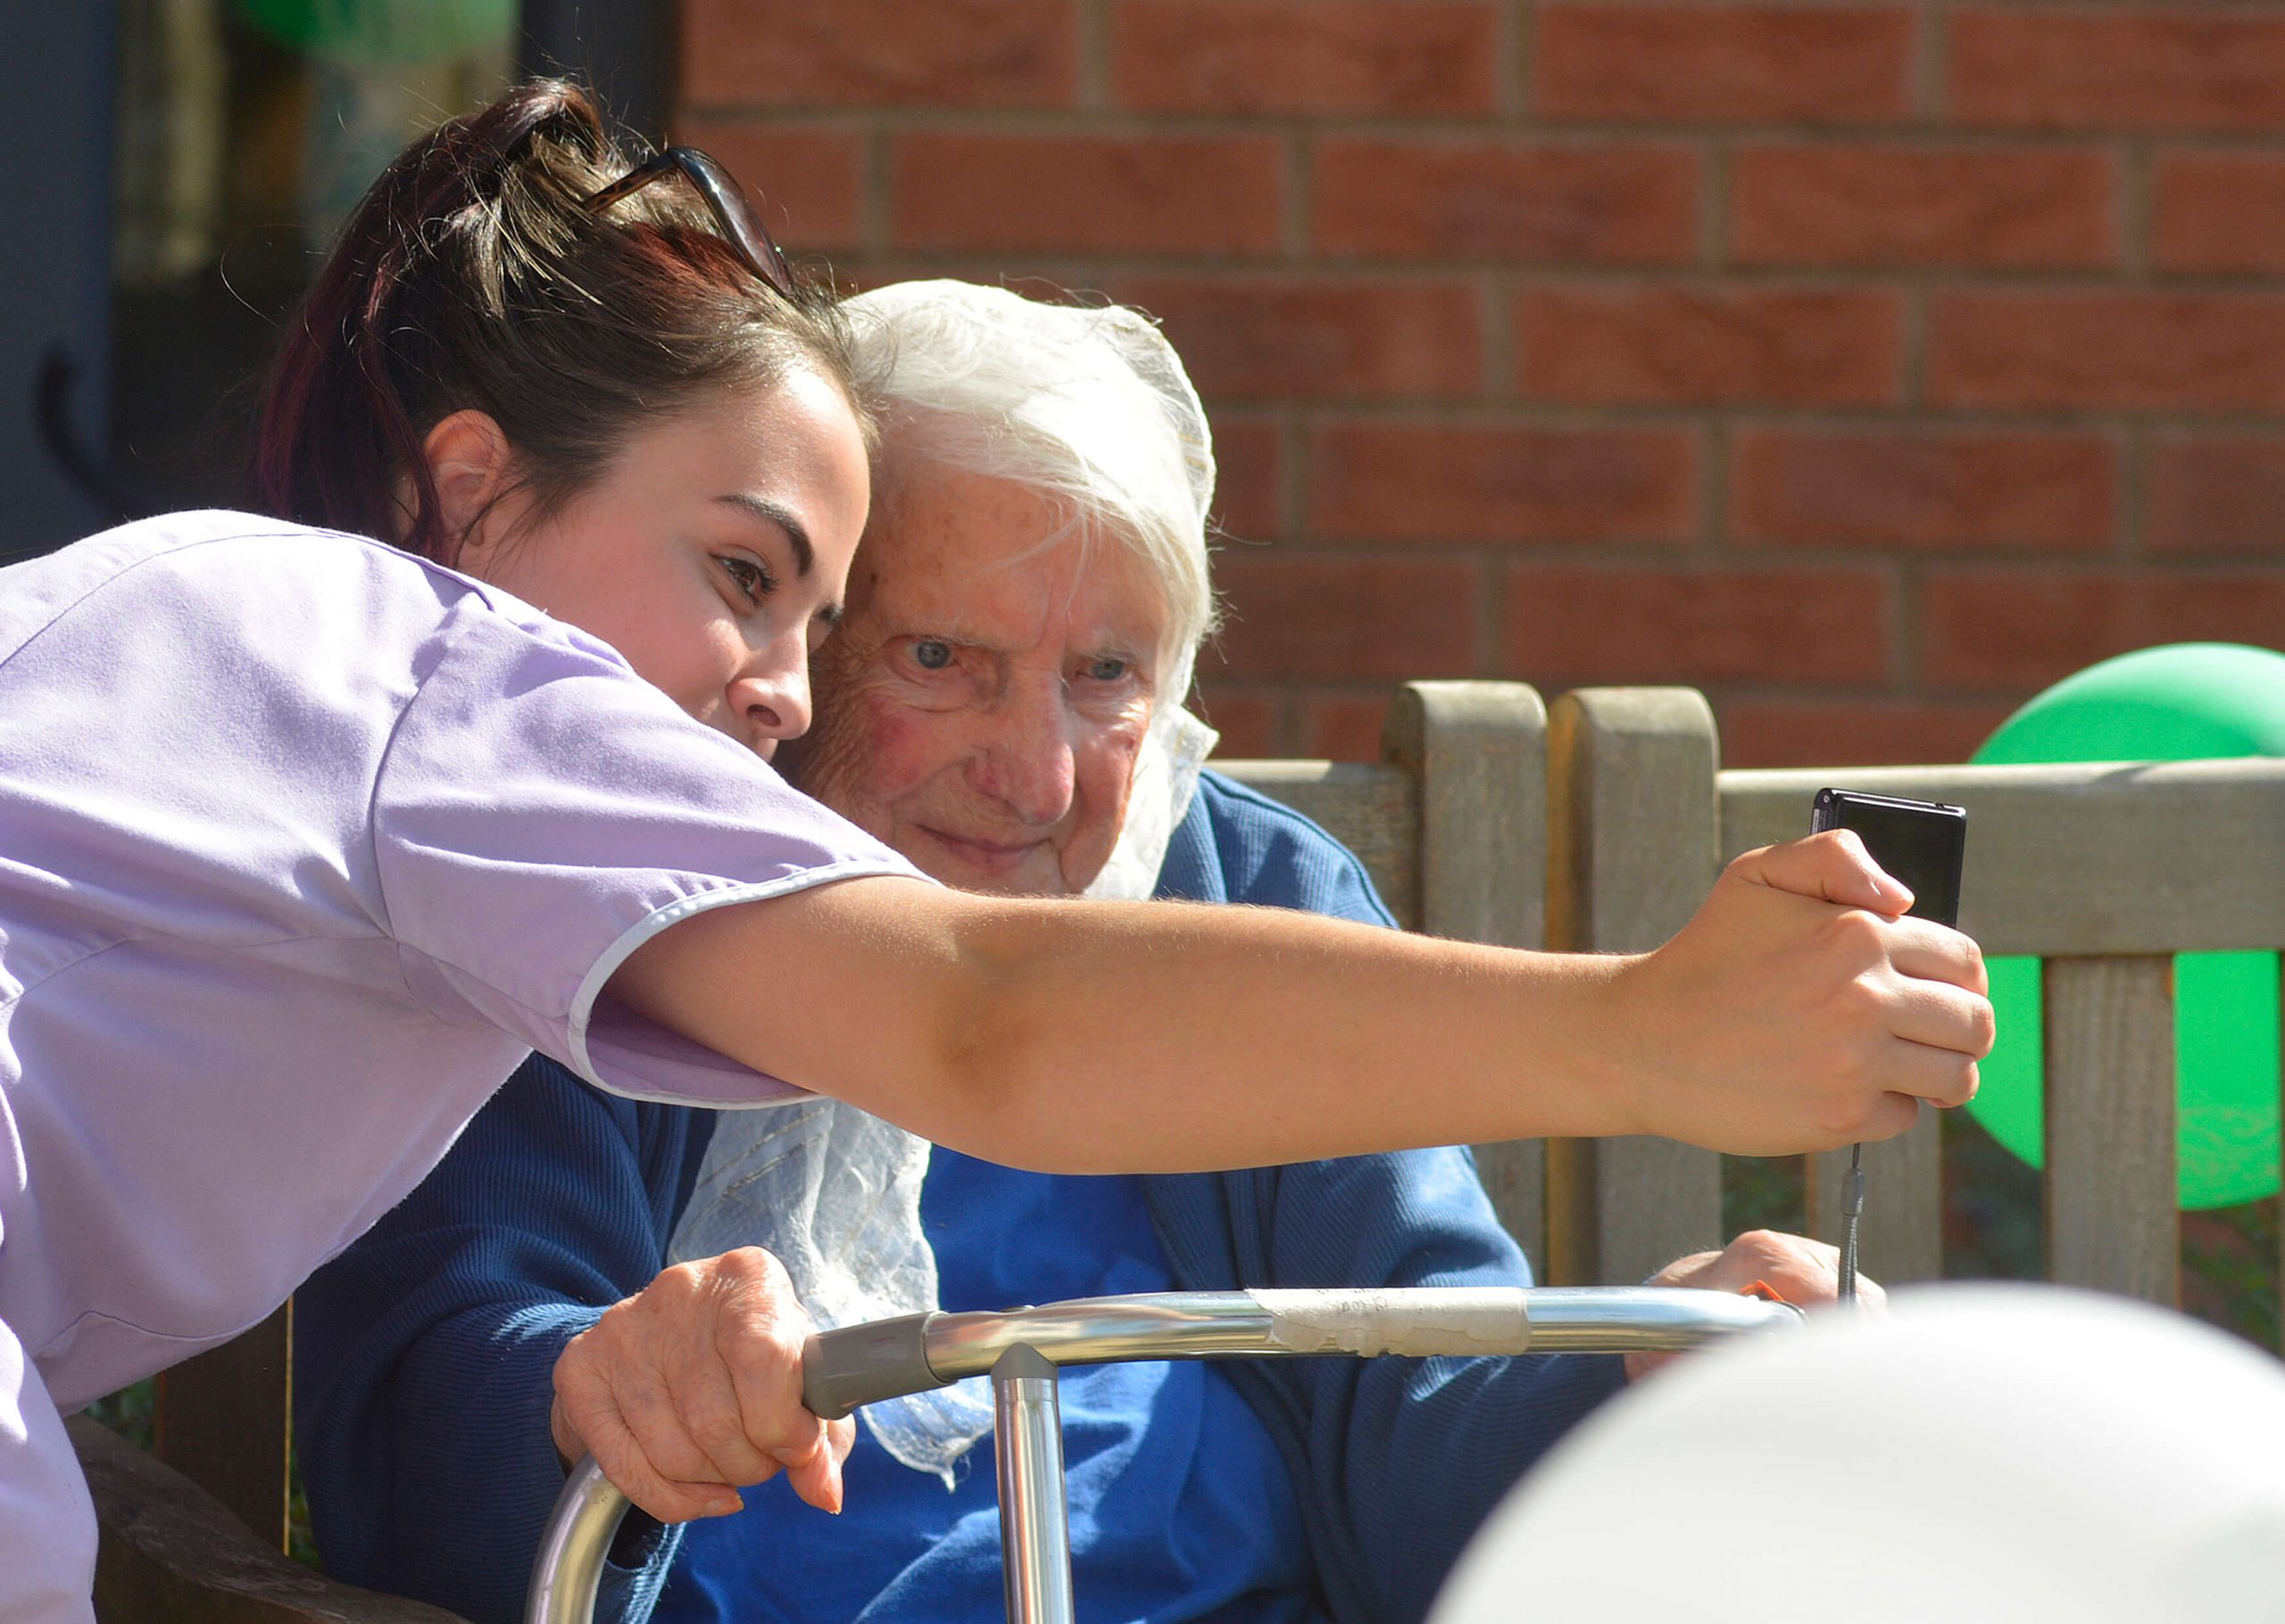 A male residents having a selfie with a female resident.